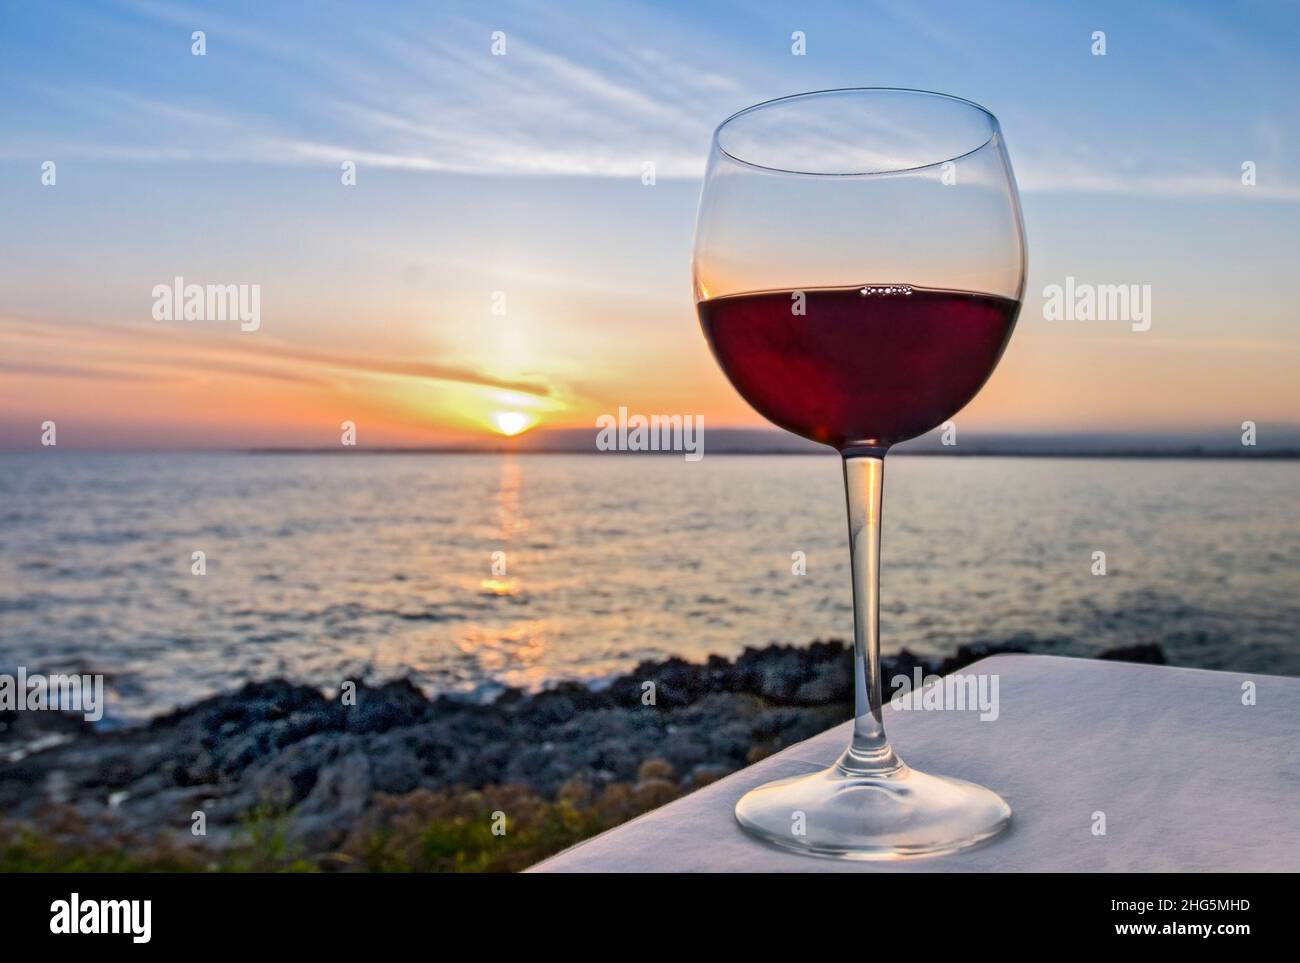 Red wine glass on restaurant table at sunset with seascape vista landscape behind Stock Photo